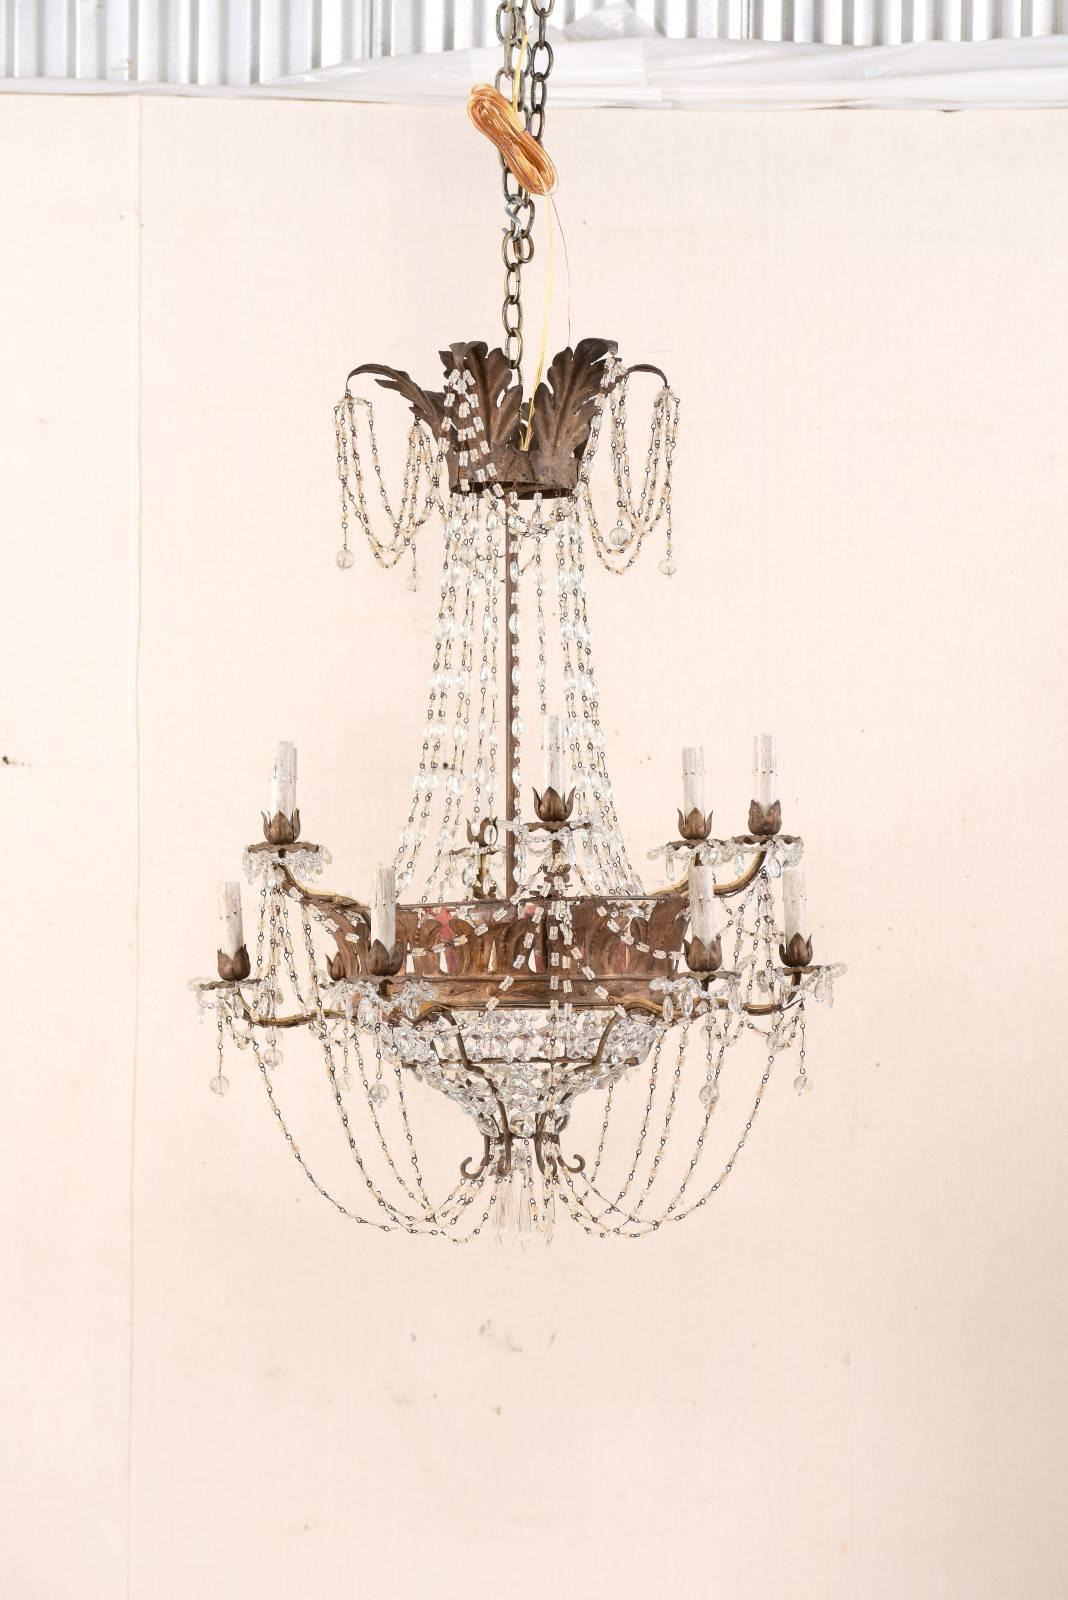 An Italian midcentury twelve-light crystal basket chandelier. This antique chandelier from Italy features a two-tiered, basket design with anthemia decorated crown and gallery. Harmonious swags of crystal and Italian glass beads are draped